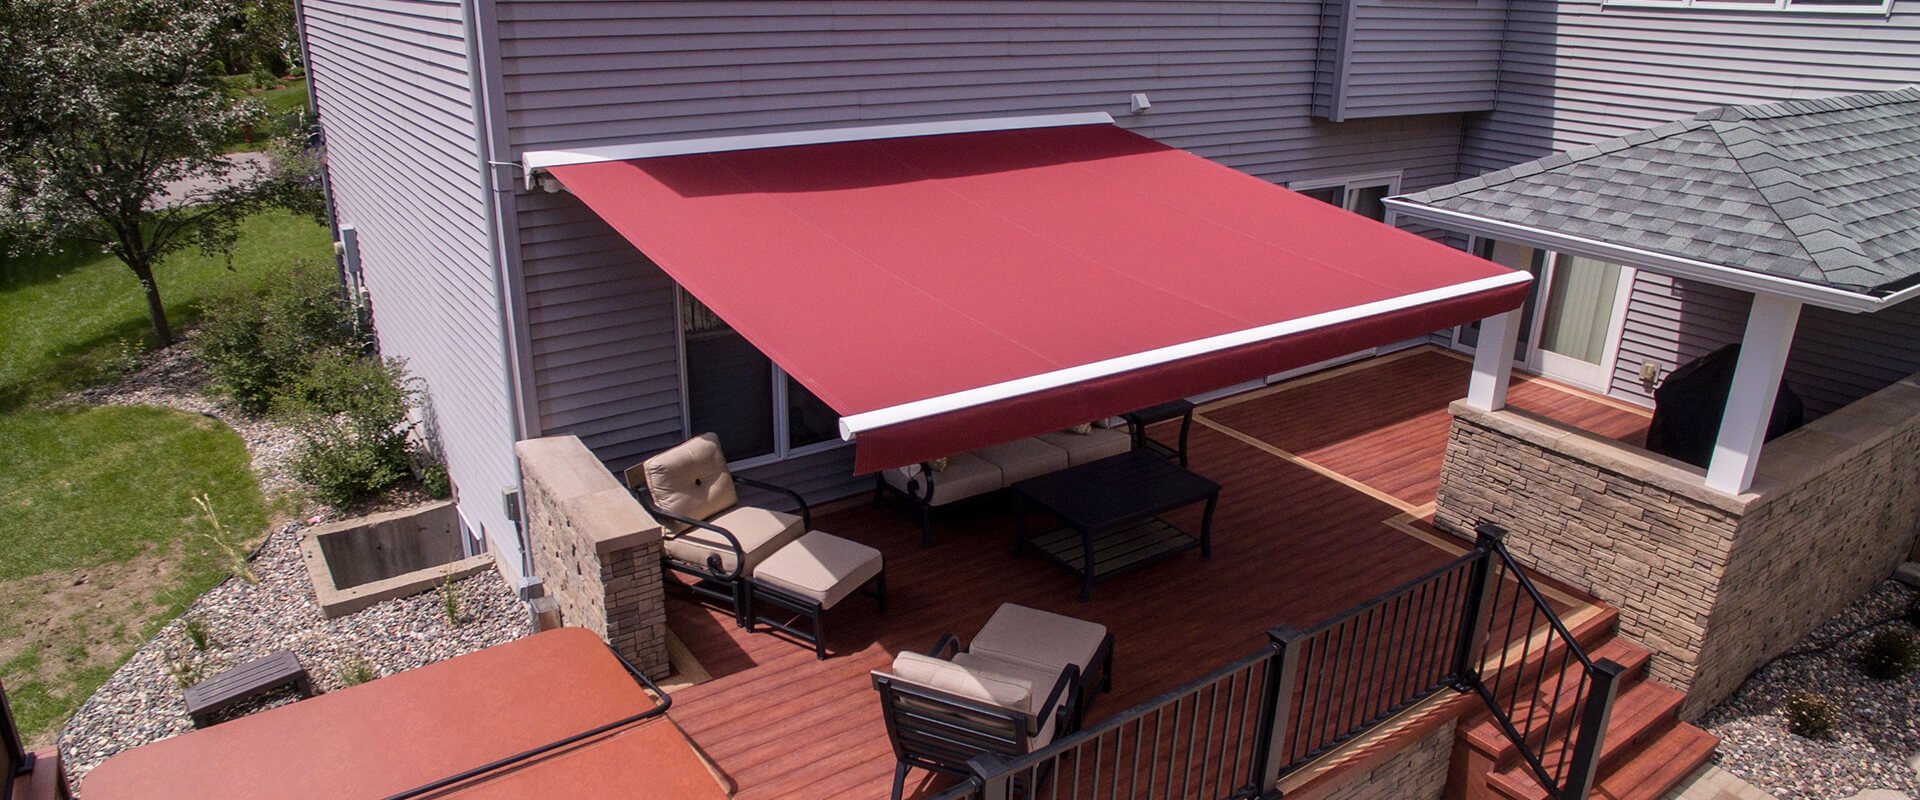 Maximizing Your Outdoor Space with Retractable Awnings